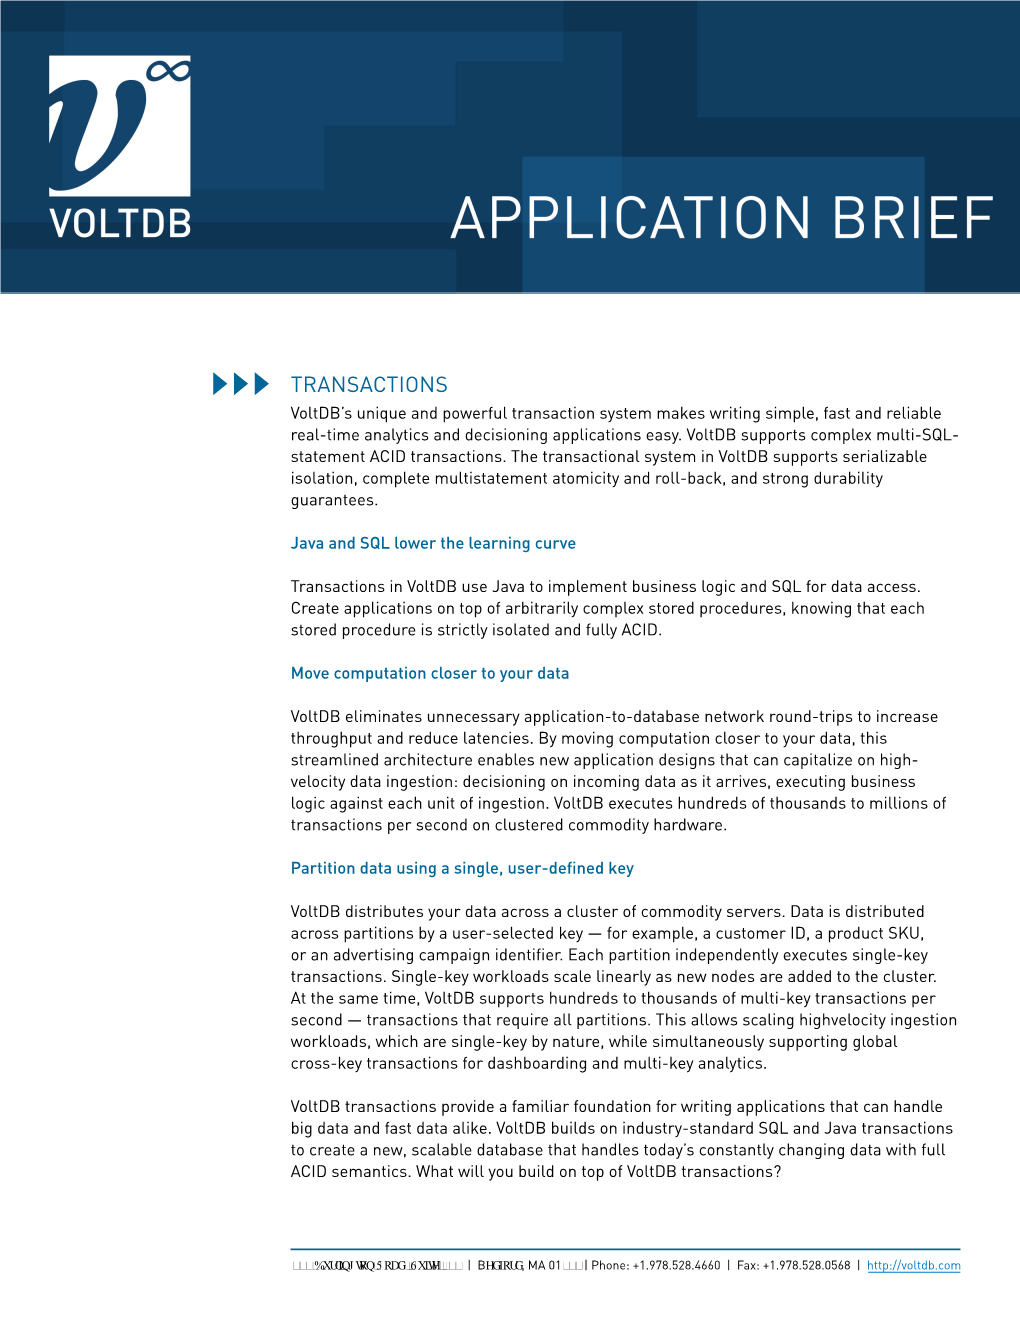 TRANSACTIONS Voltdb’S Unique and Powerful Transaction System Makes Writing Simple, Fast and Reliable Real-Time Analytics and Decisioning Applications Easy